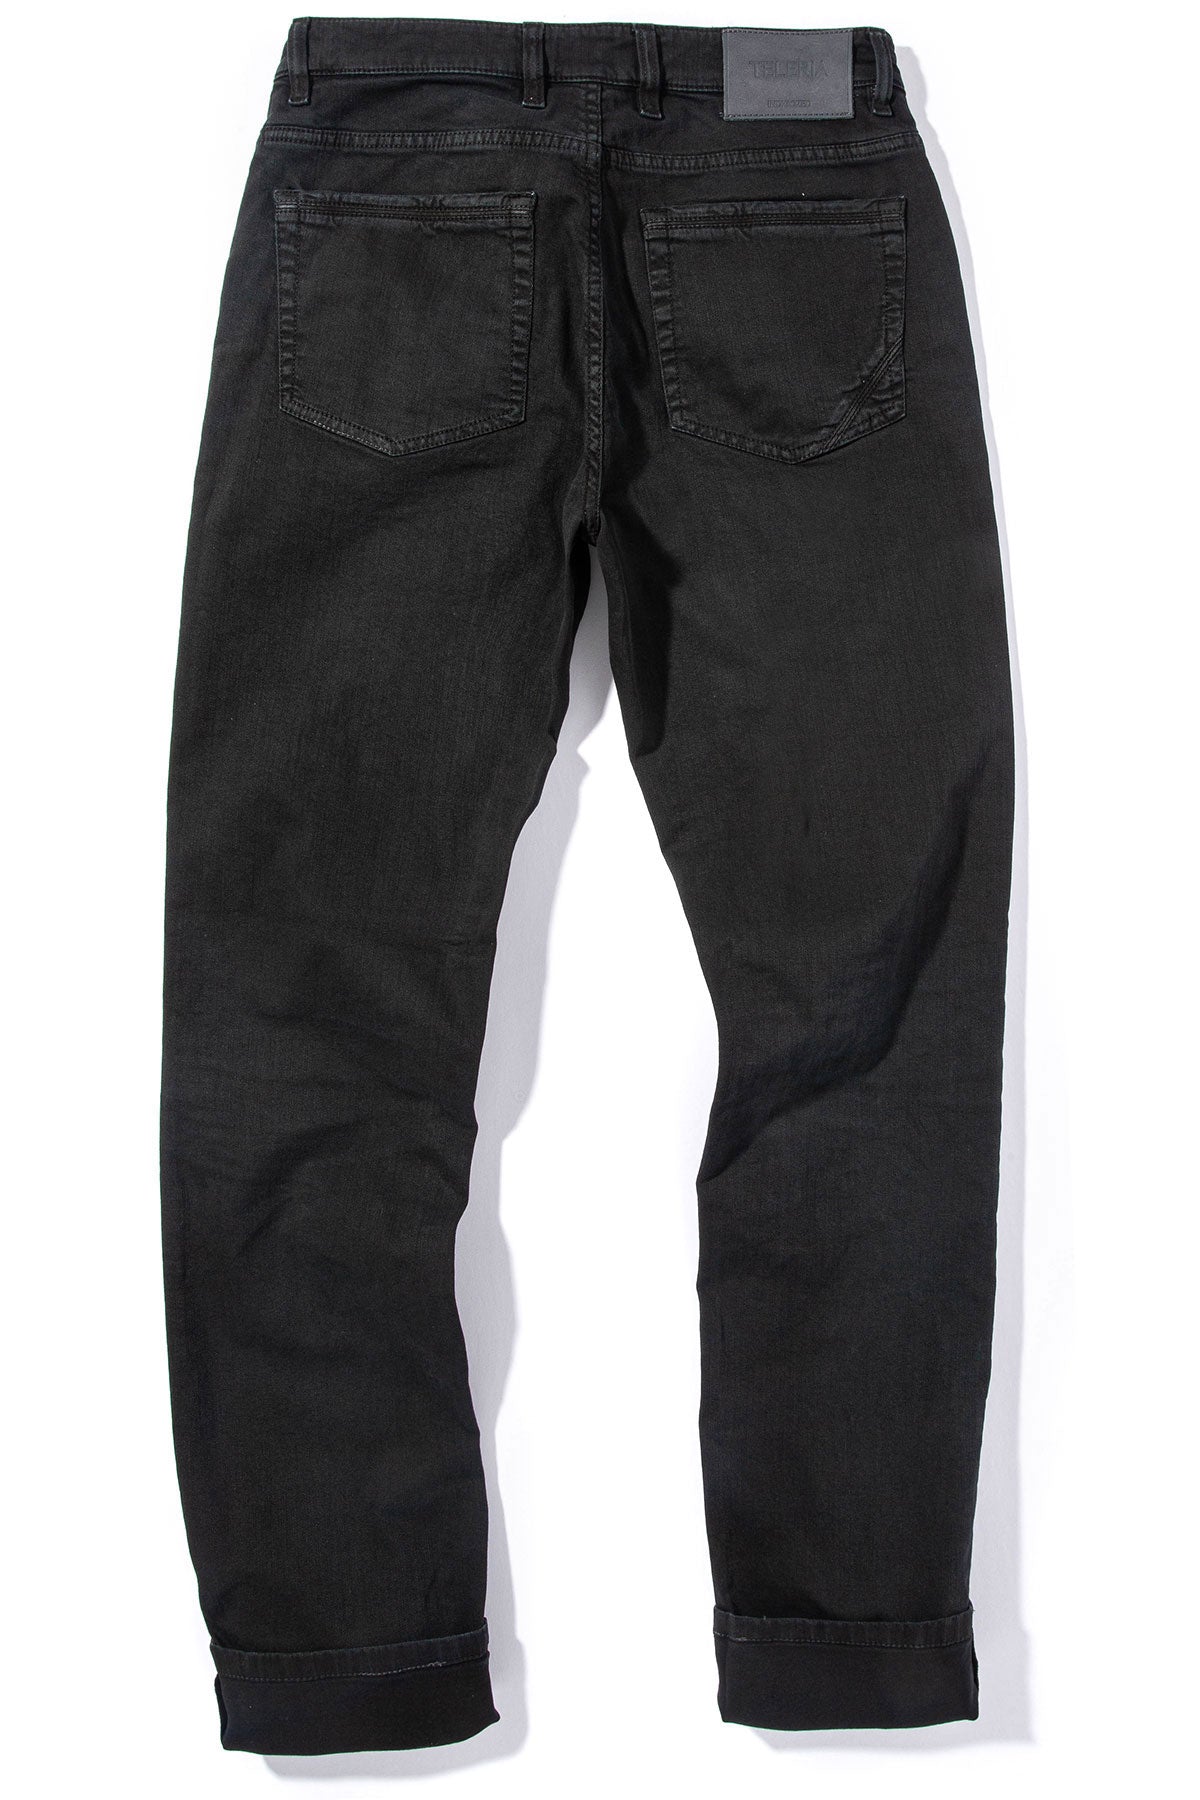 Ouray 5-Pocket Stretch Twill in Nero | Mens - Pants - 5 Pocket | Teleria Zed